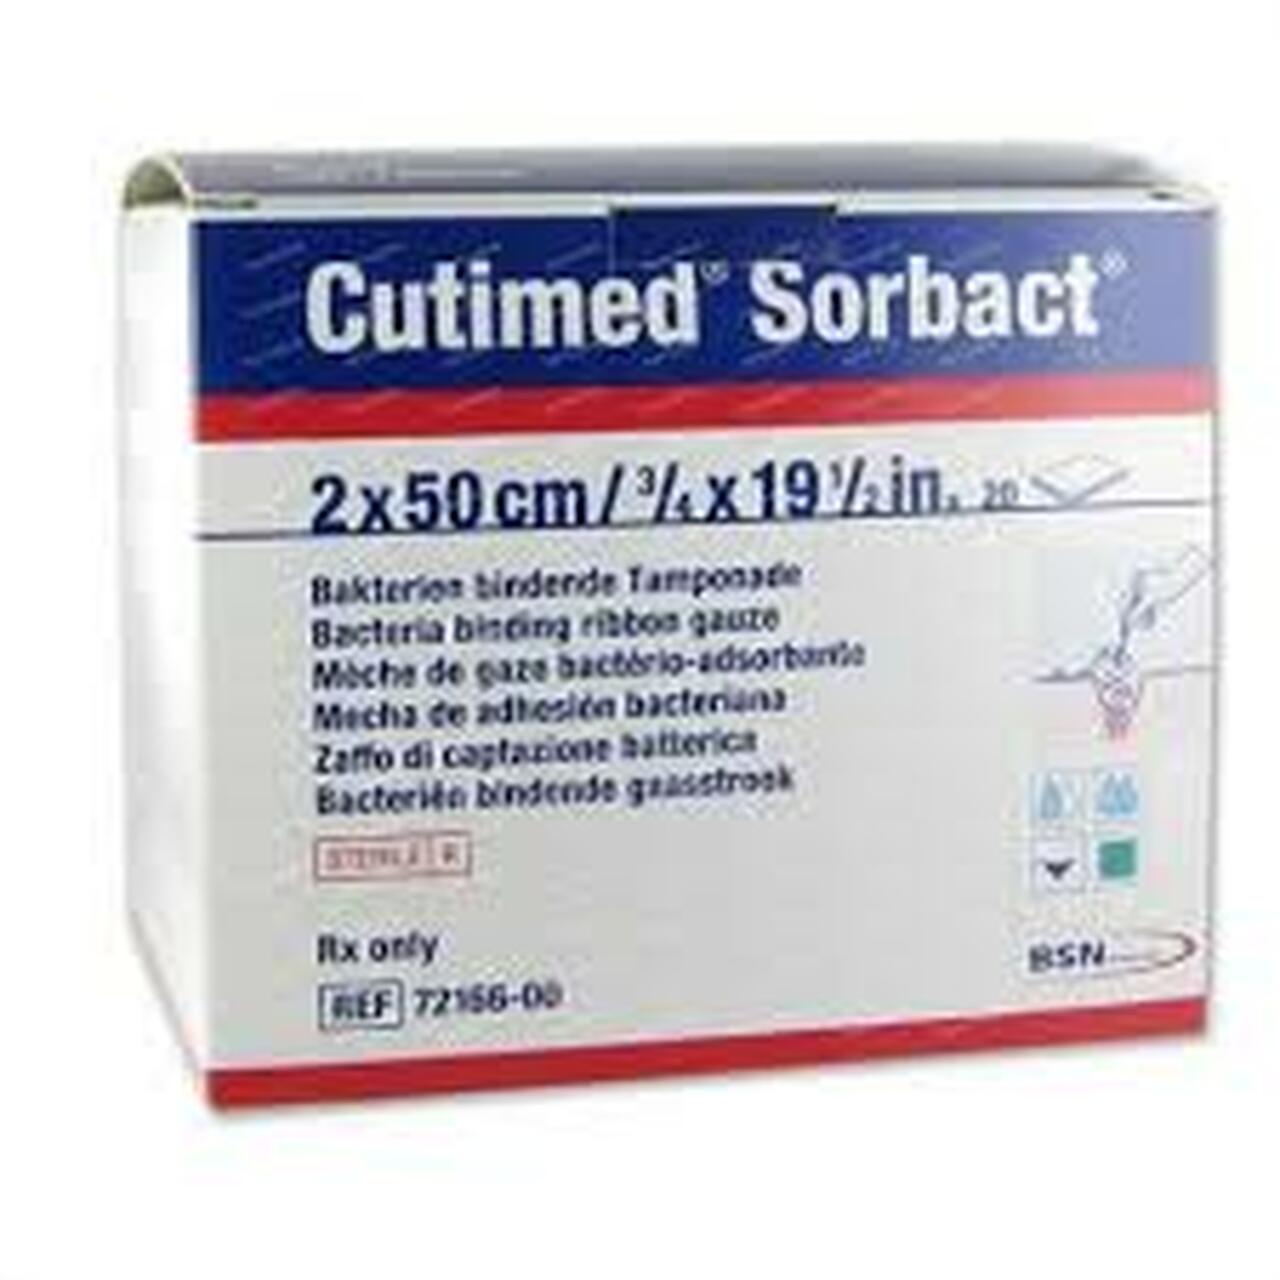 Cutimed Sorbact Antimicrobial Dressing W/Bacteria Binding Action 4cm X6cm - Box Of 5